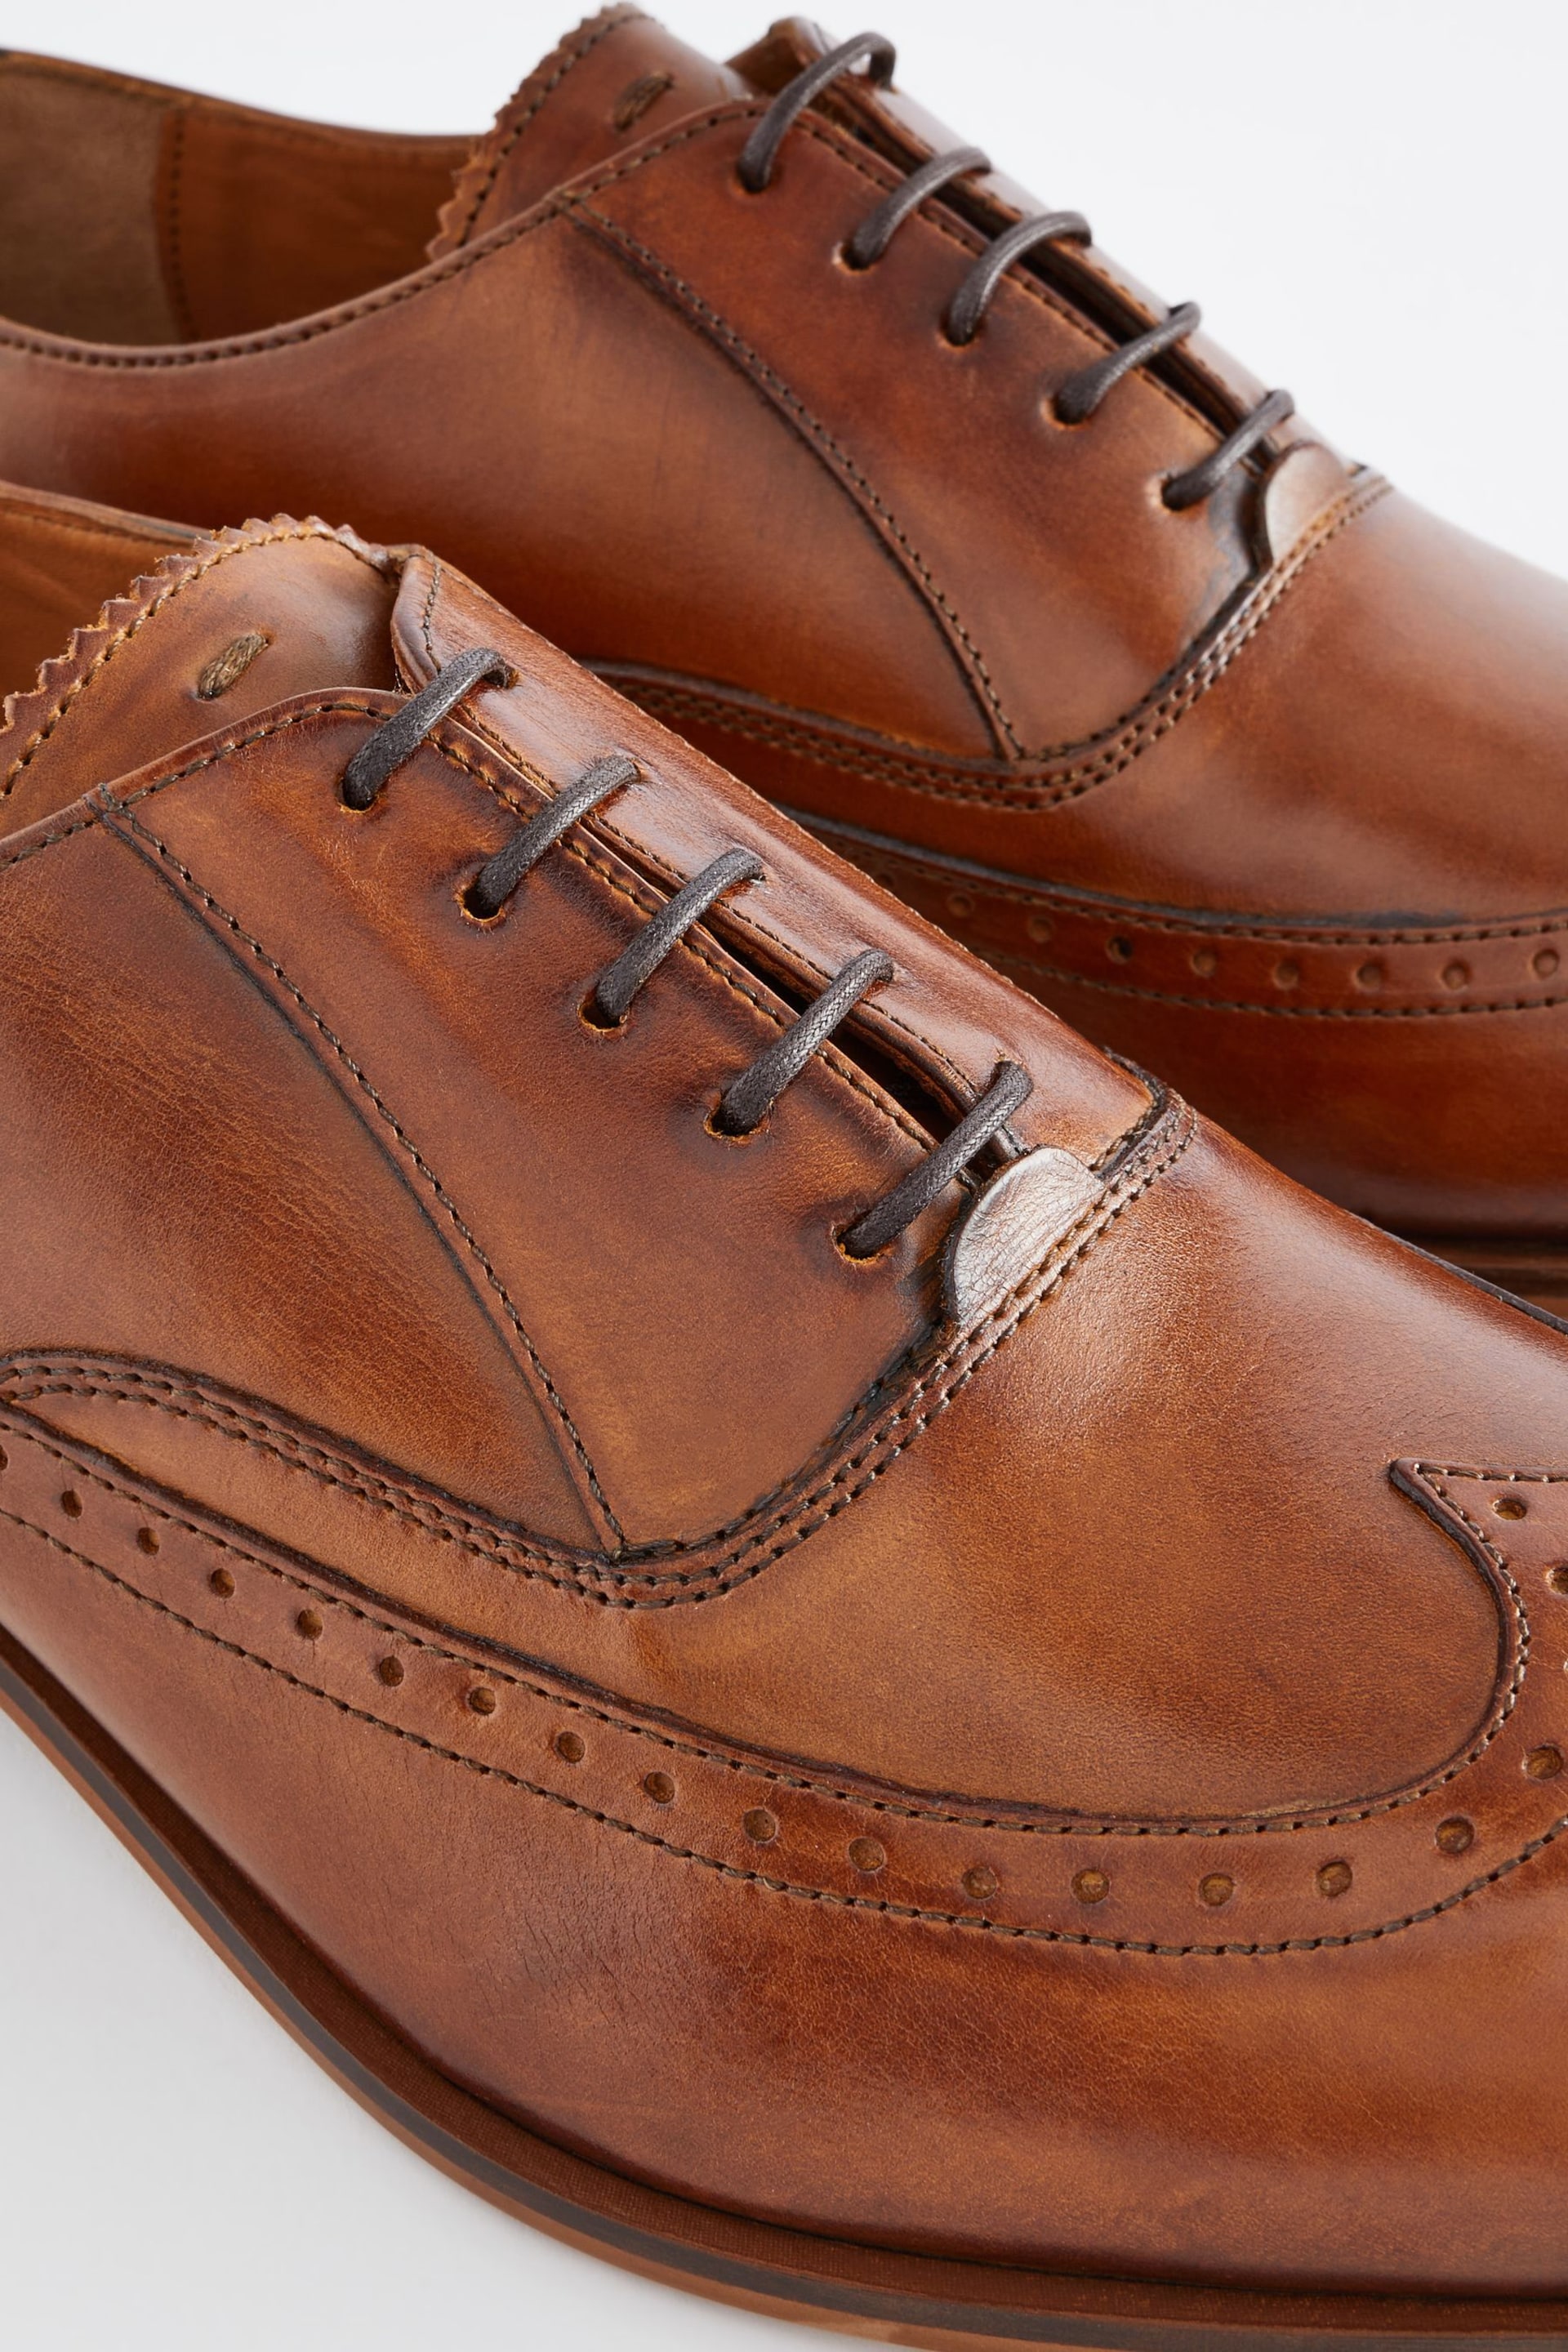 Dark Tan Brown Leather Oxford Wing Cap Brogue Shoes - Image 4 of 8